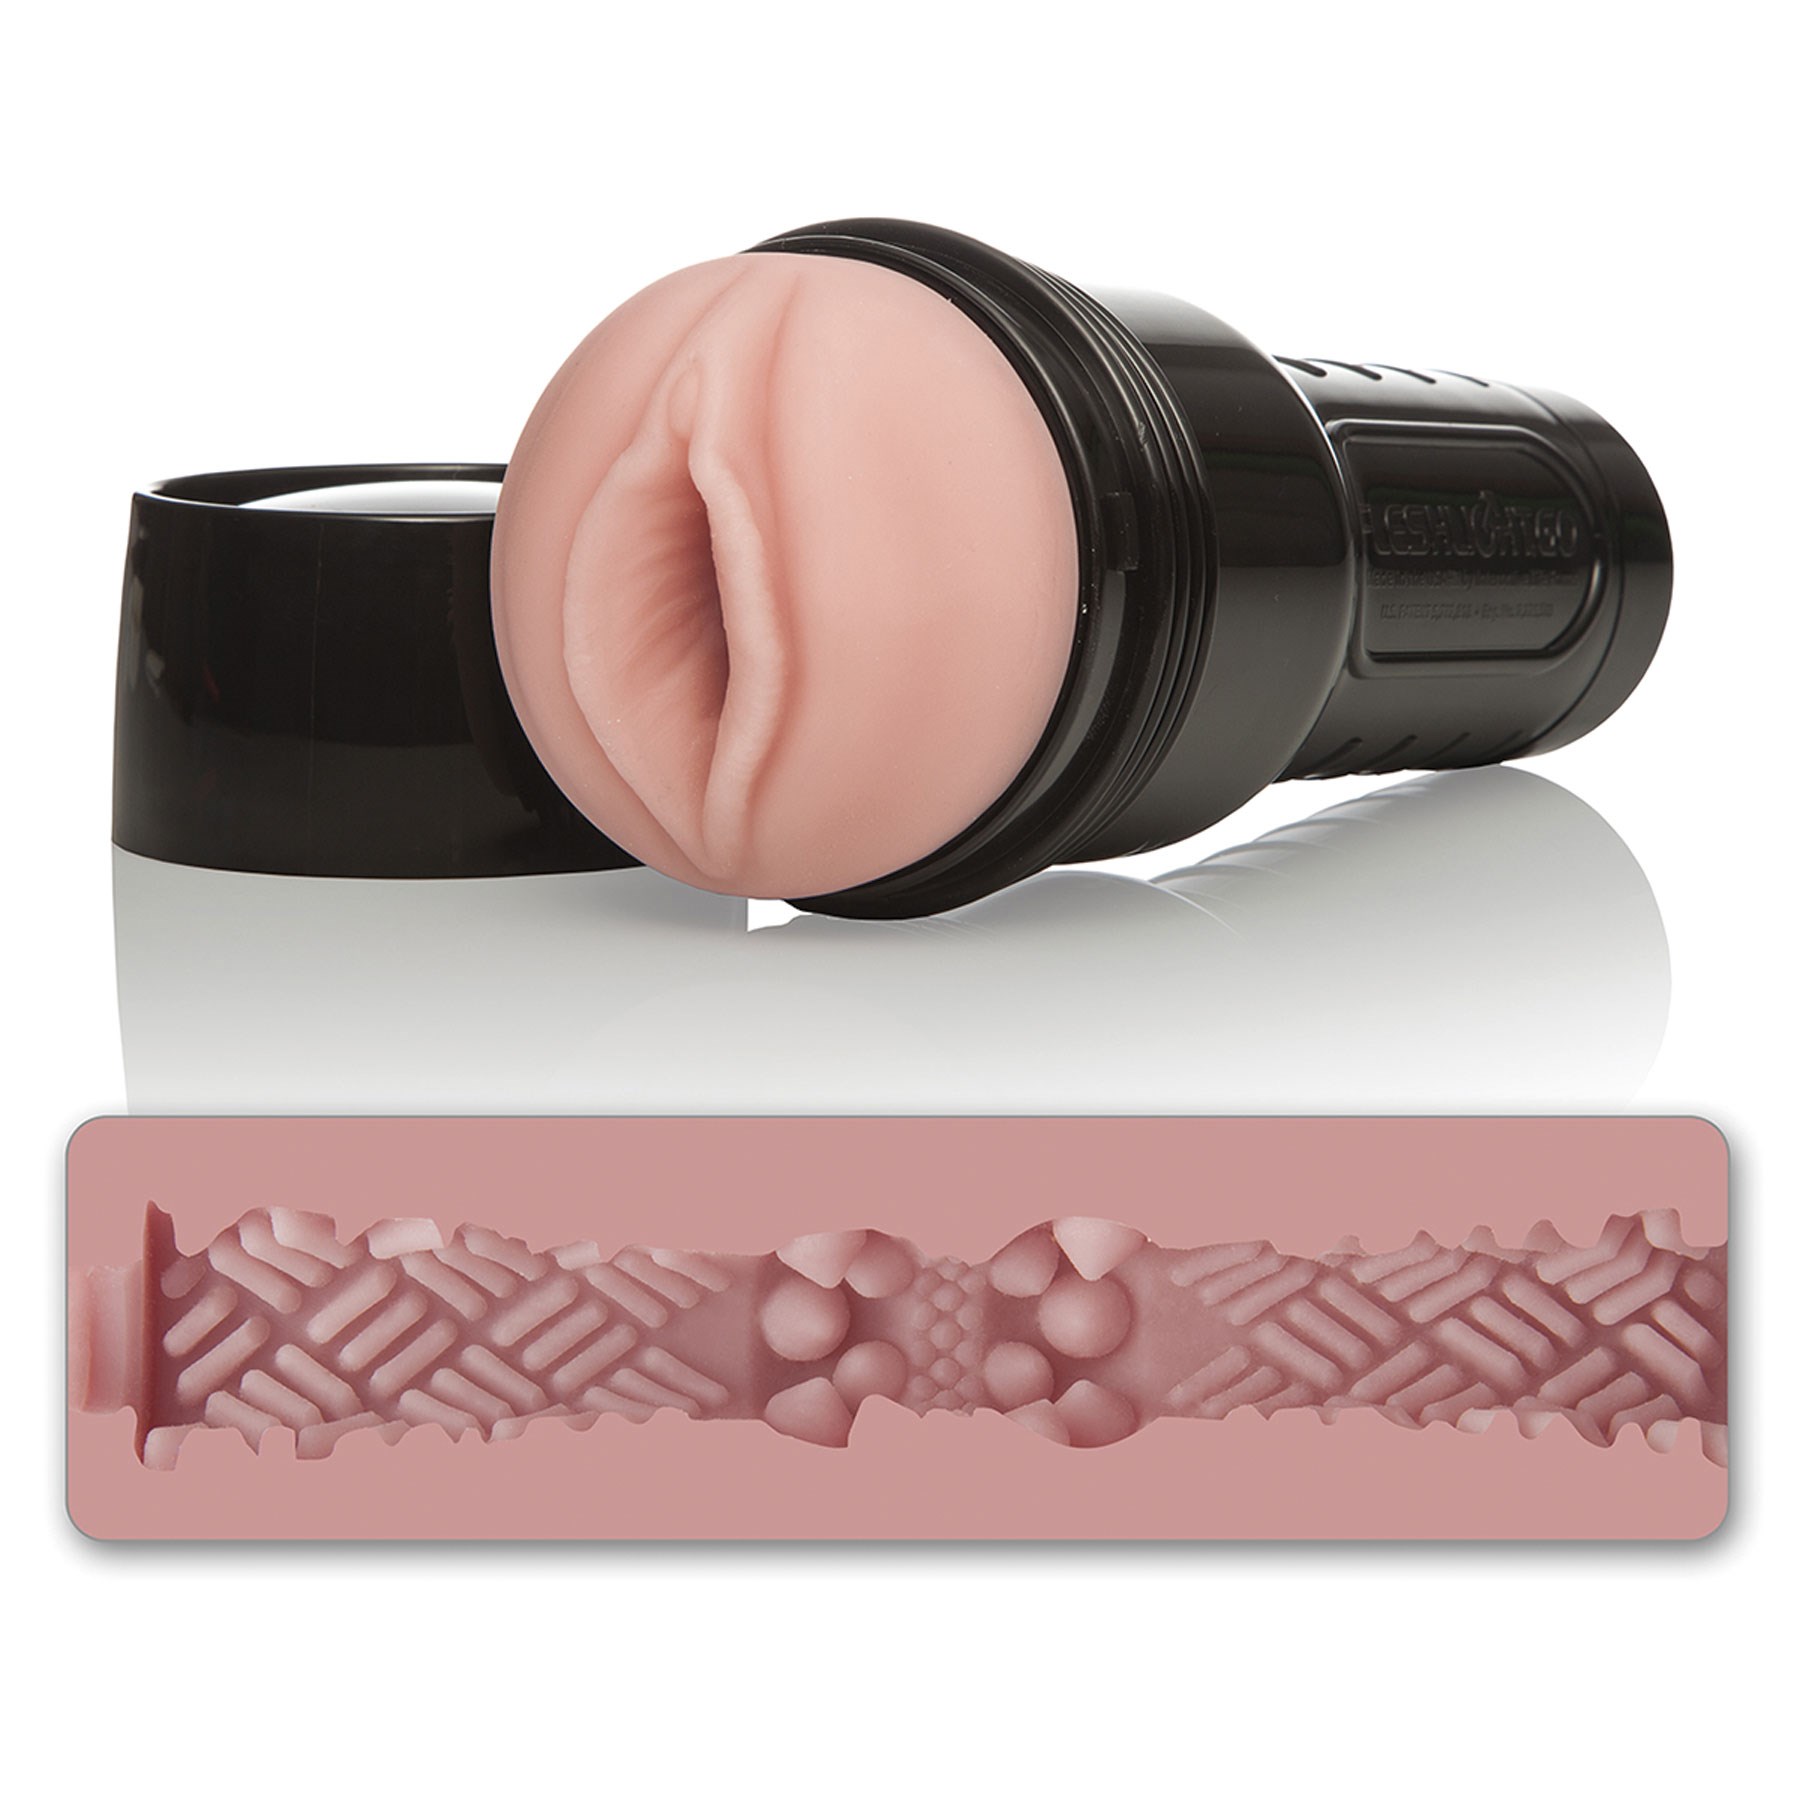 Fleshlight Go: Surge Pack tunnel view